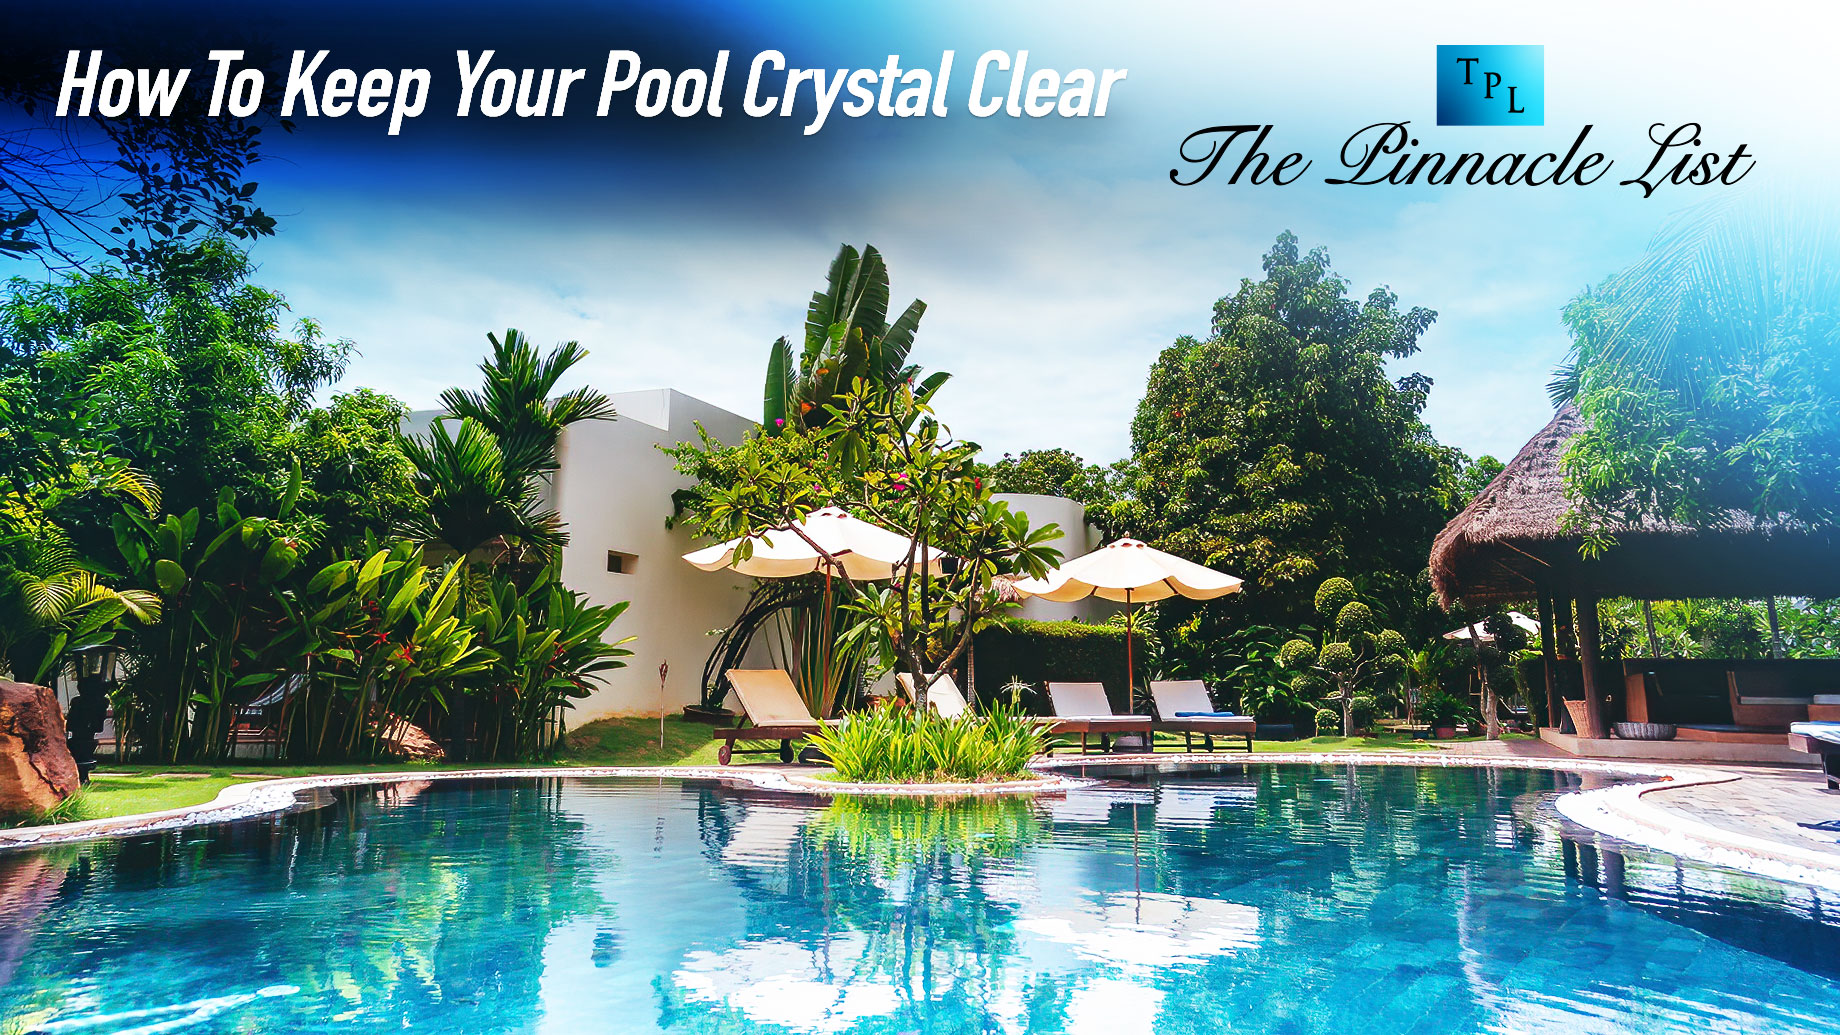 How To Keep Your Pool Crystal Clear: Maintenance Tips And Tricks